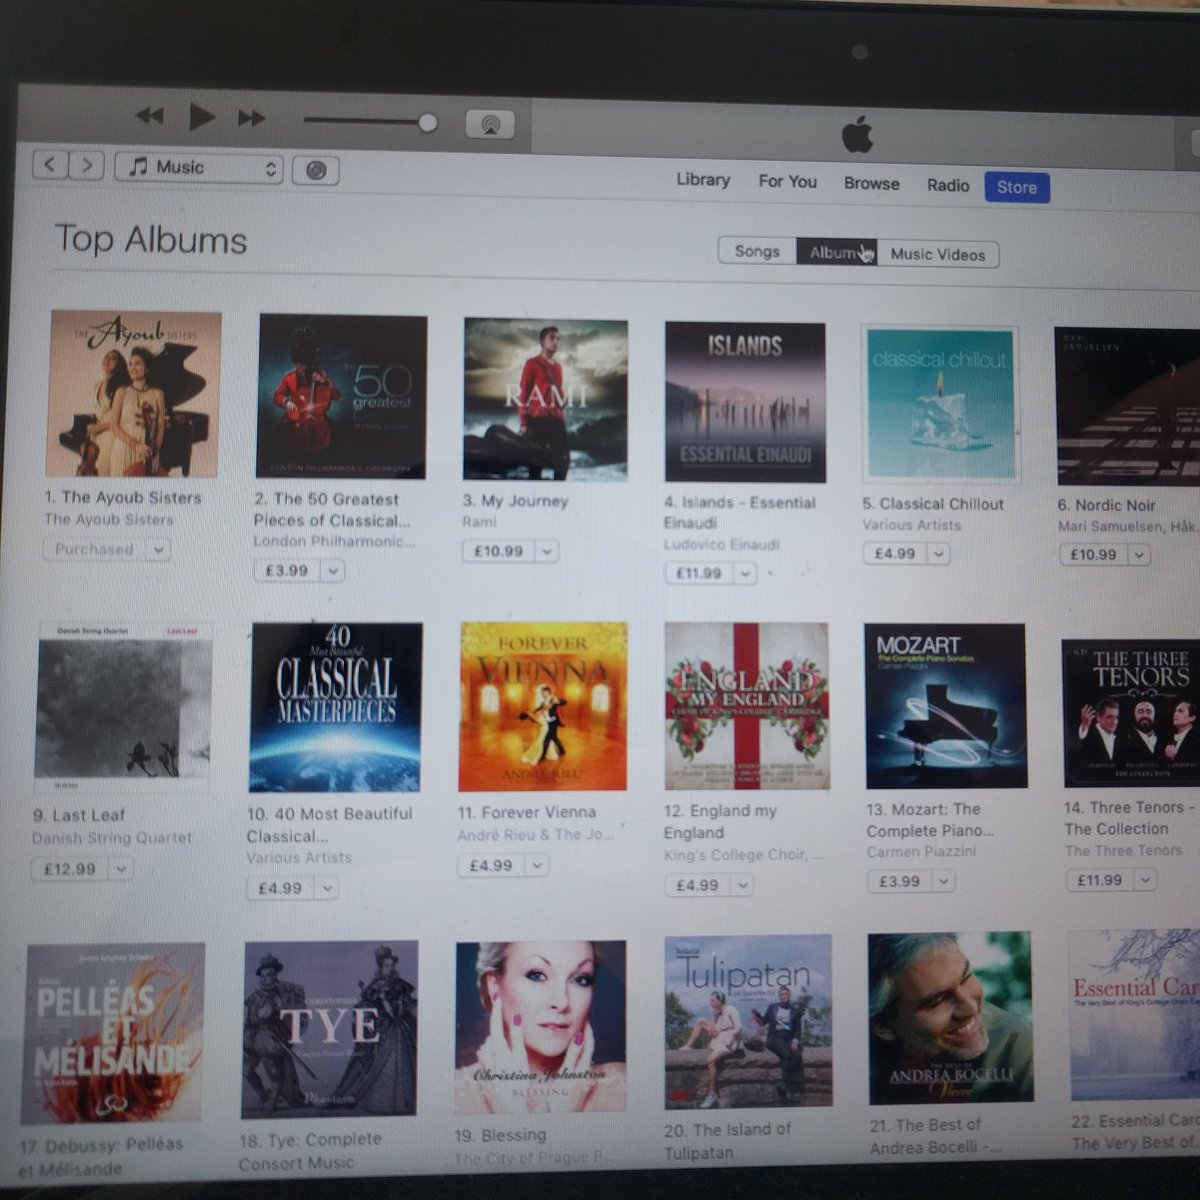 Itunes Classical Music Charts